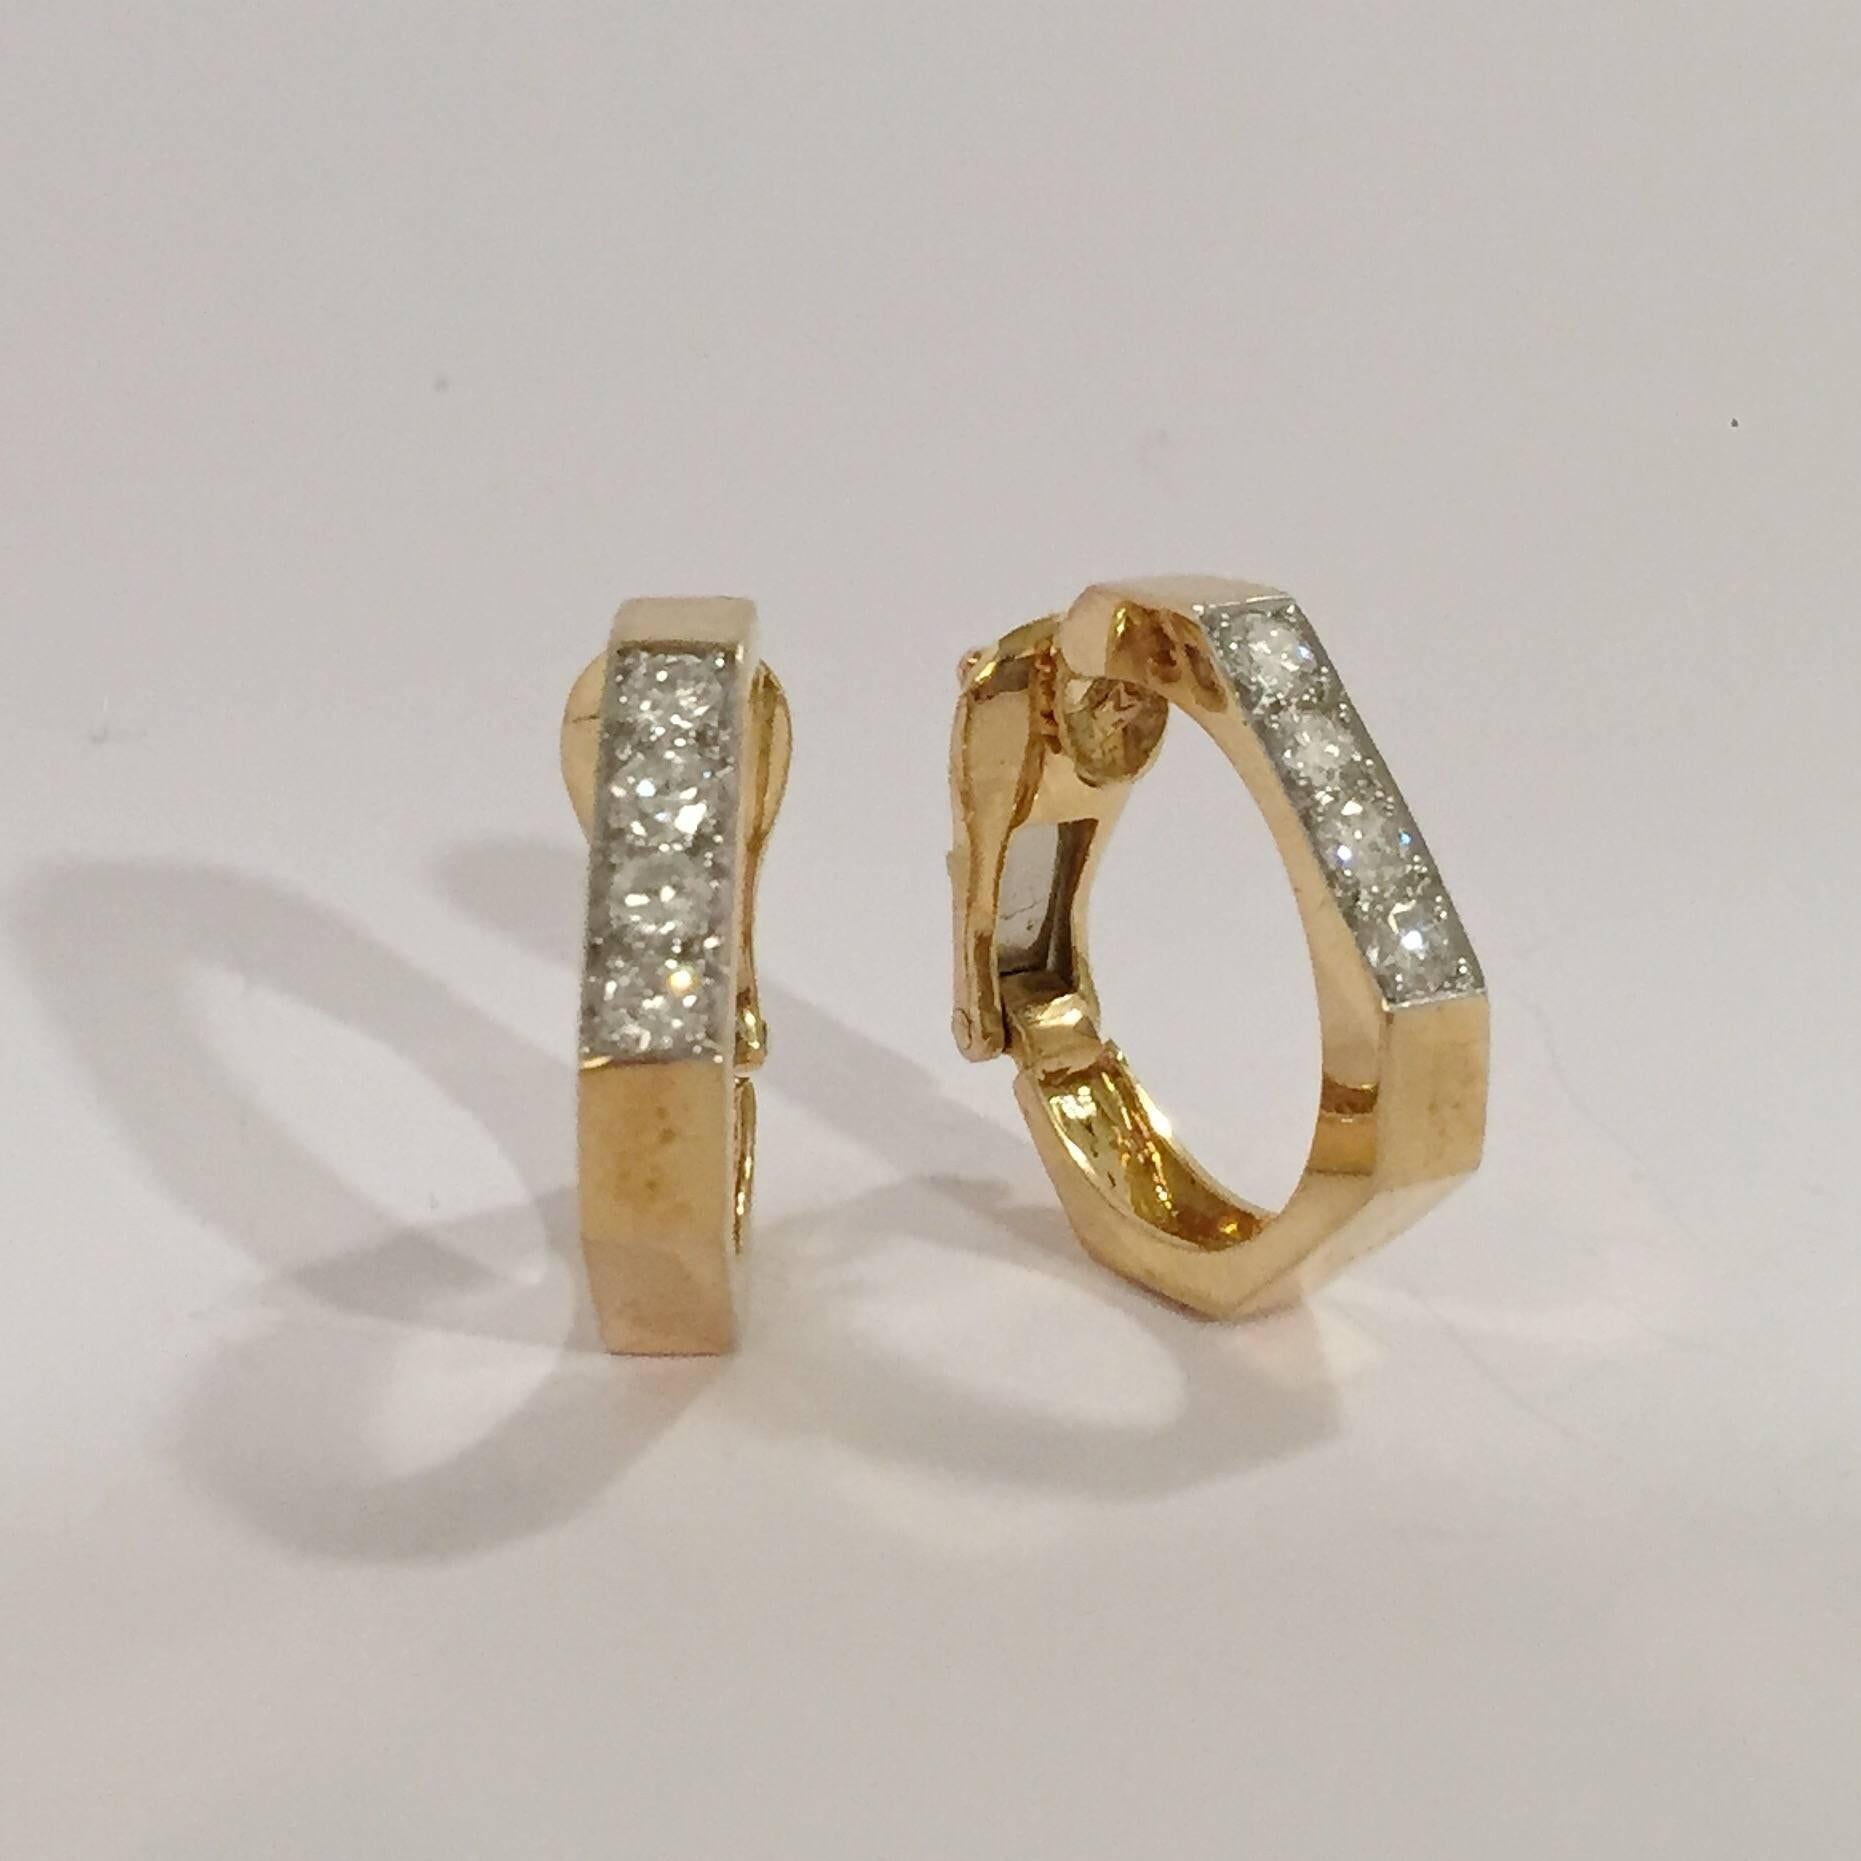 18kt Yellow gold Diamond Hoop angled shape clip earring, David Webb.  The Hoops contain 6 round diamonds weighing approximately  1.00ct.

The hoops are made for clip earrings but can be posted.

The earrings measure  7/8